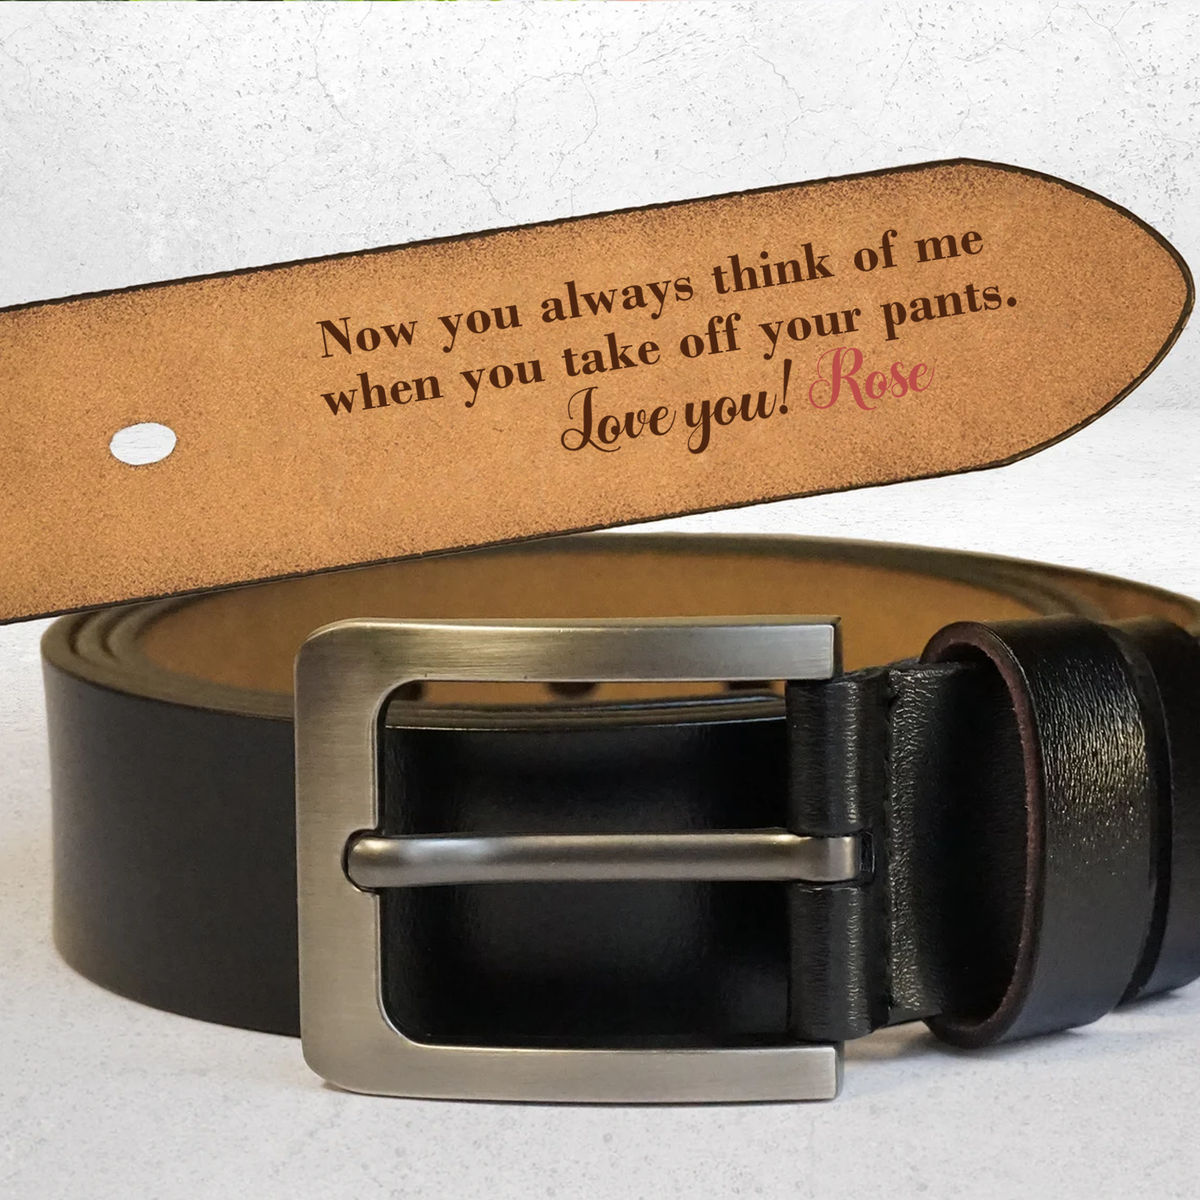 Father's Day Gifts - Now you always think of me  when you take off your pants. Love you!.- Custom Name - Gift For Man, Dad, Husband, BoyFriend...- Gift For Father's Day, Birthday, Anniversary... - Personalized Men Leather Belt_4